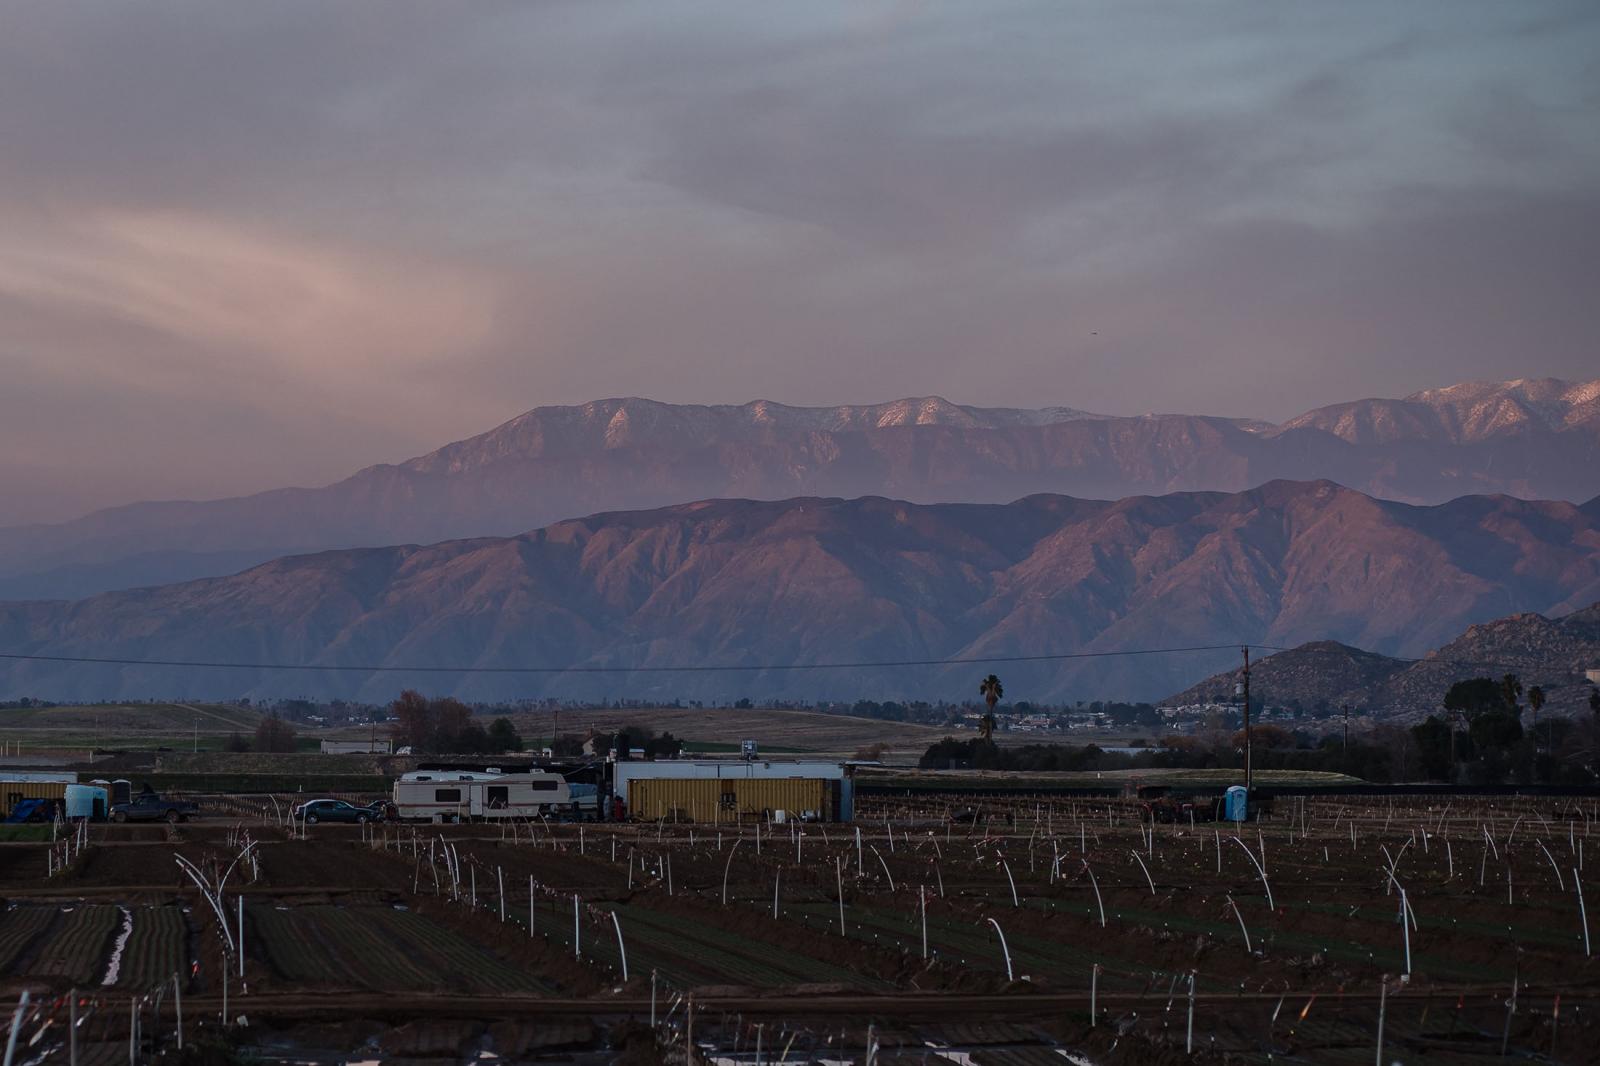 Image from United States - A view of a farm with Mount San Gorgonio in the...